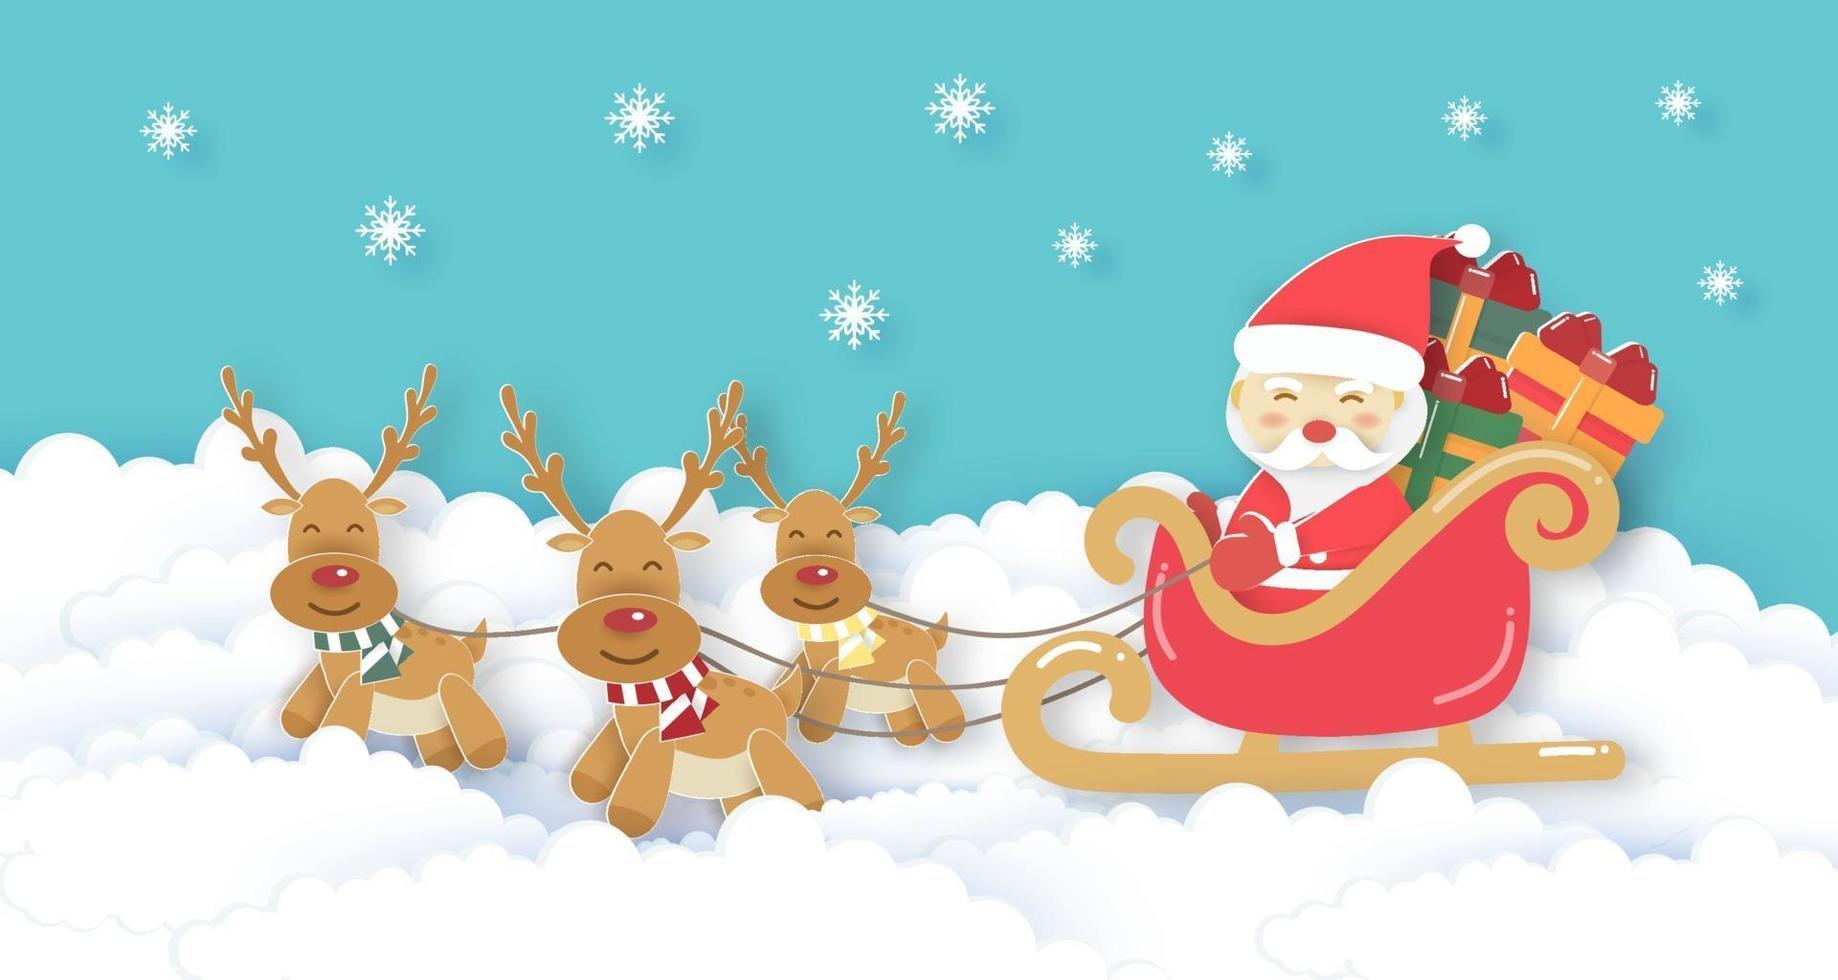 Christmas banner with a Santa clause and friends. vector